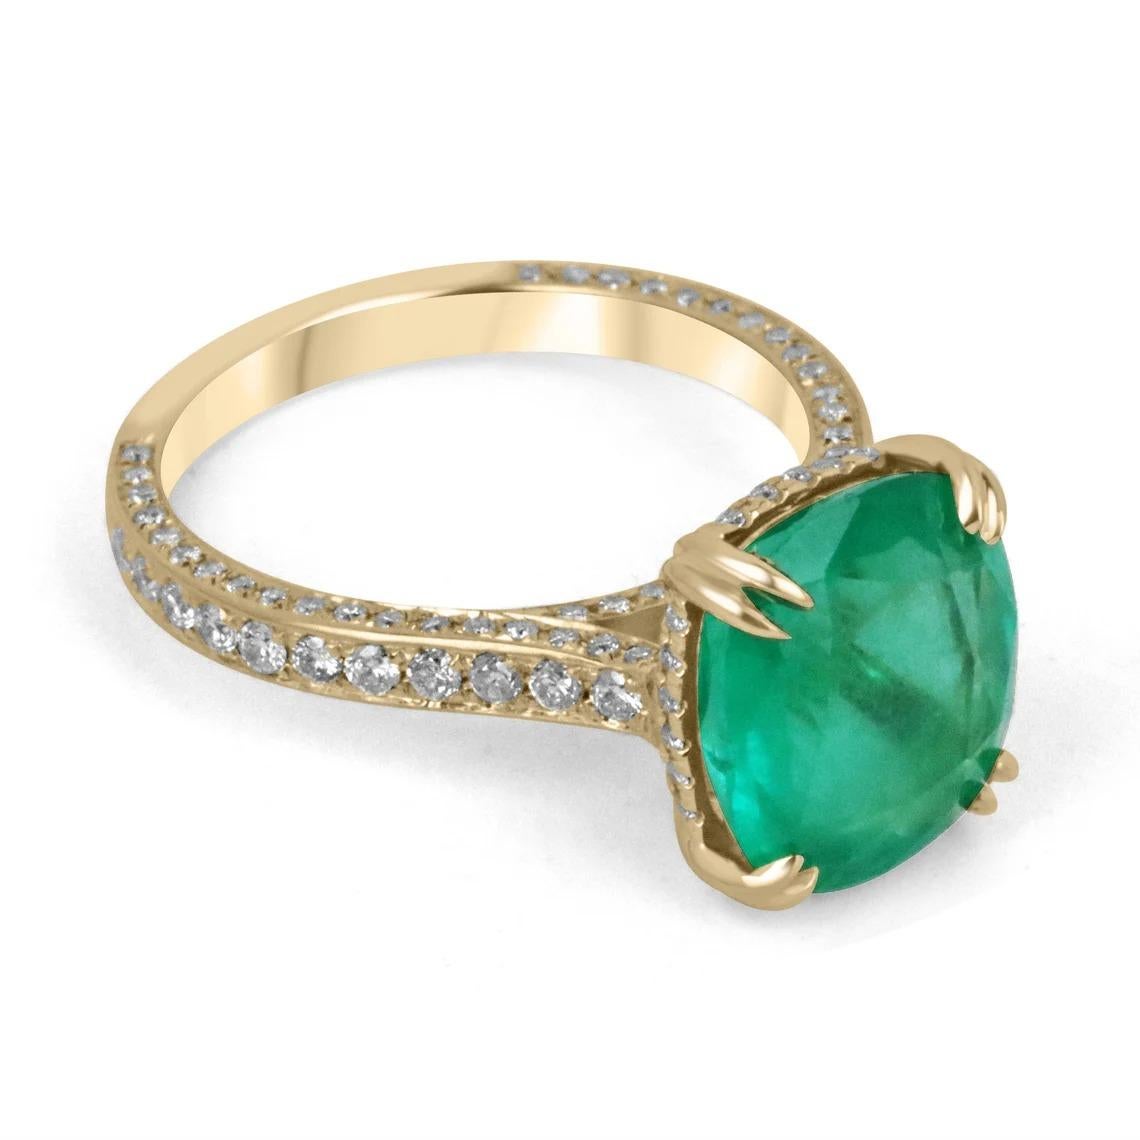 Elegantly displayed is a natural, cushion-cut Colombian emerald and diamond shank ring. The center gem is a deep green, natural emerald filled with life, color, and brilliance! Among the emeralds, impressive qualities are its vibrant color and